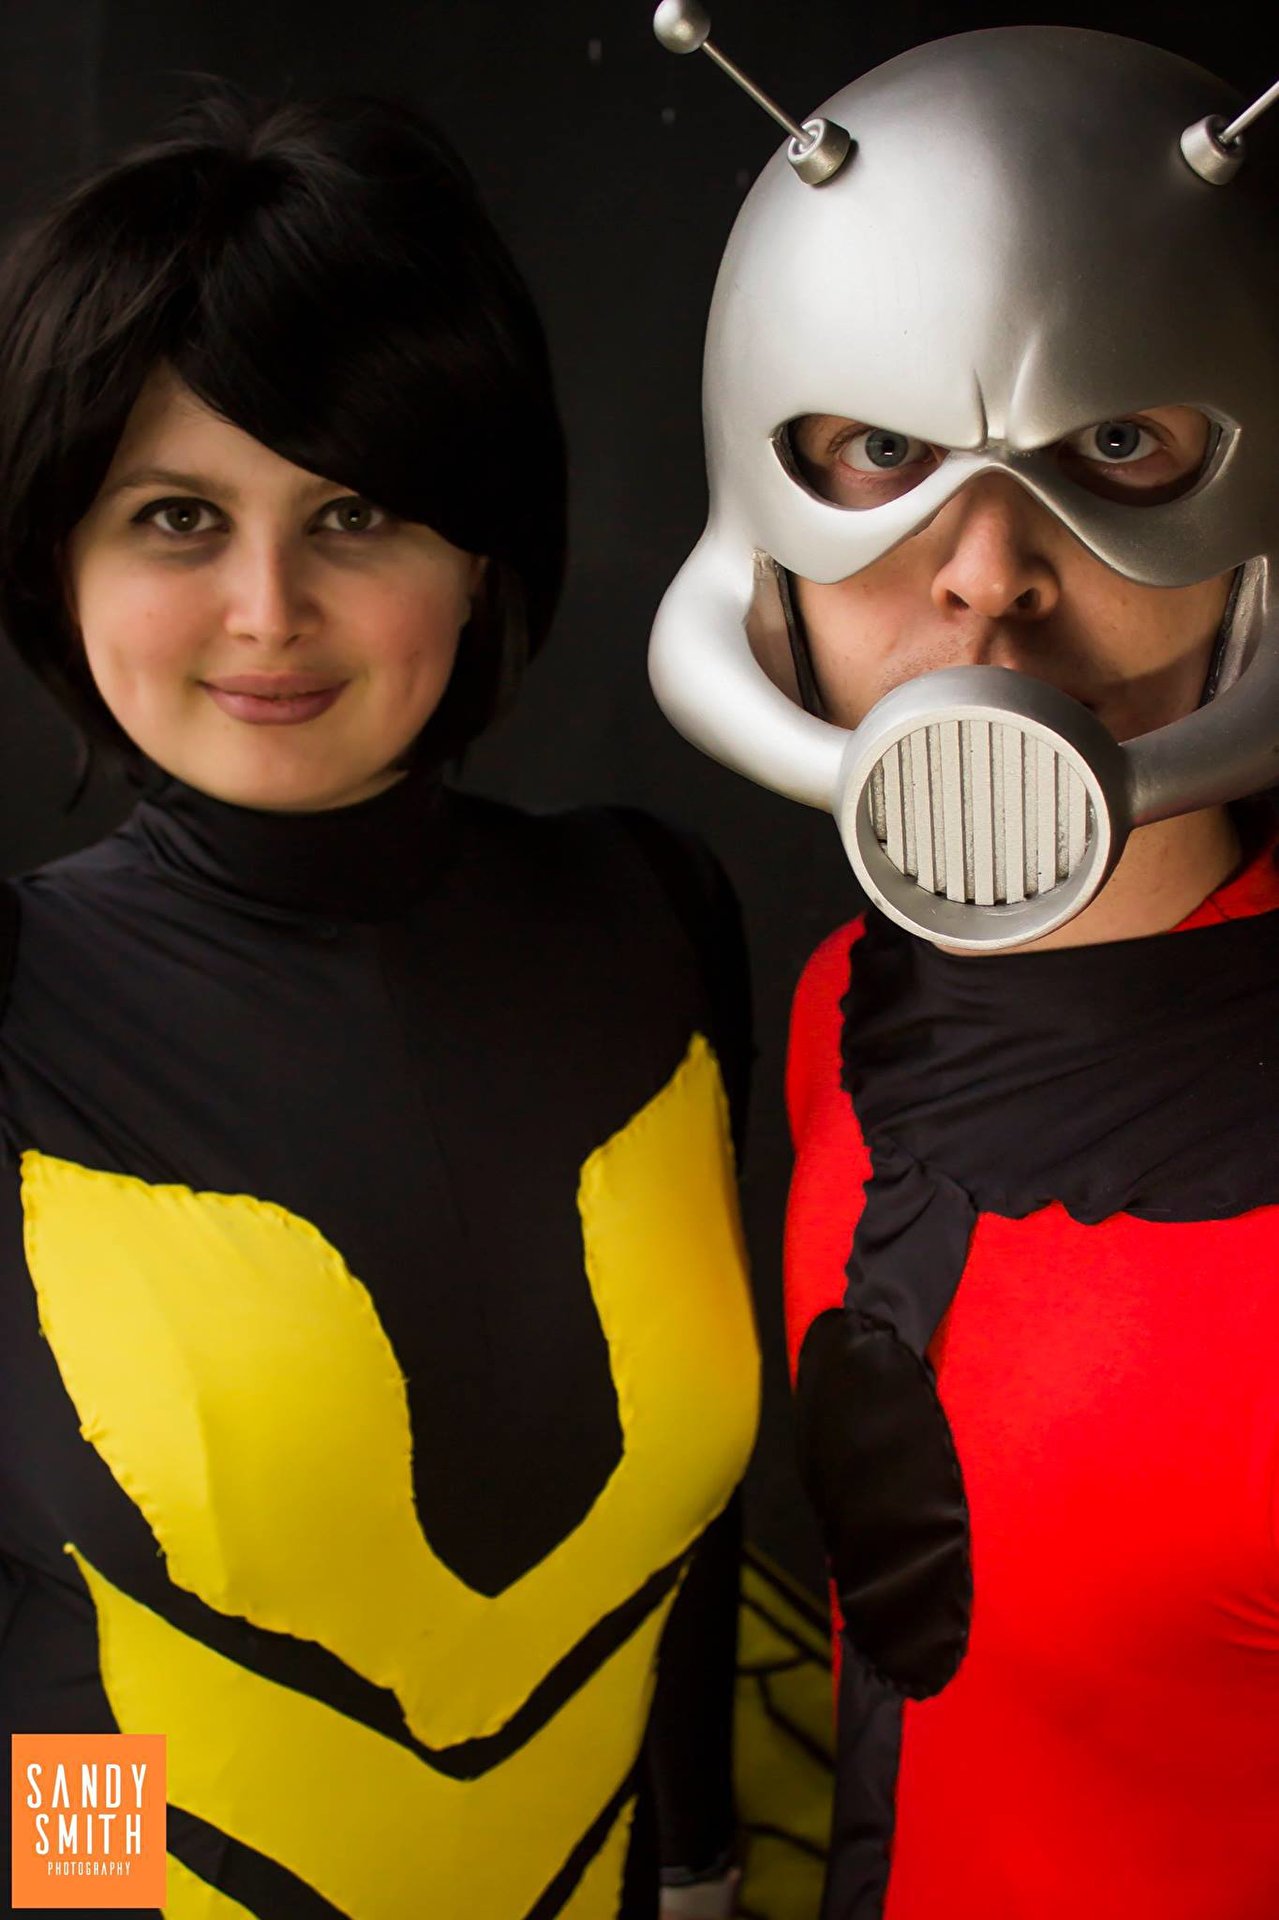 Cospix.net photo featuring That Cosplay Couple